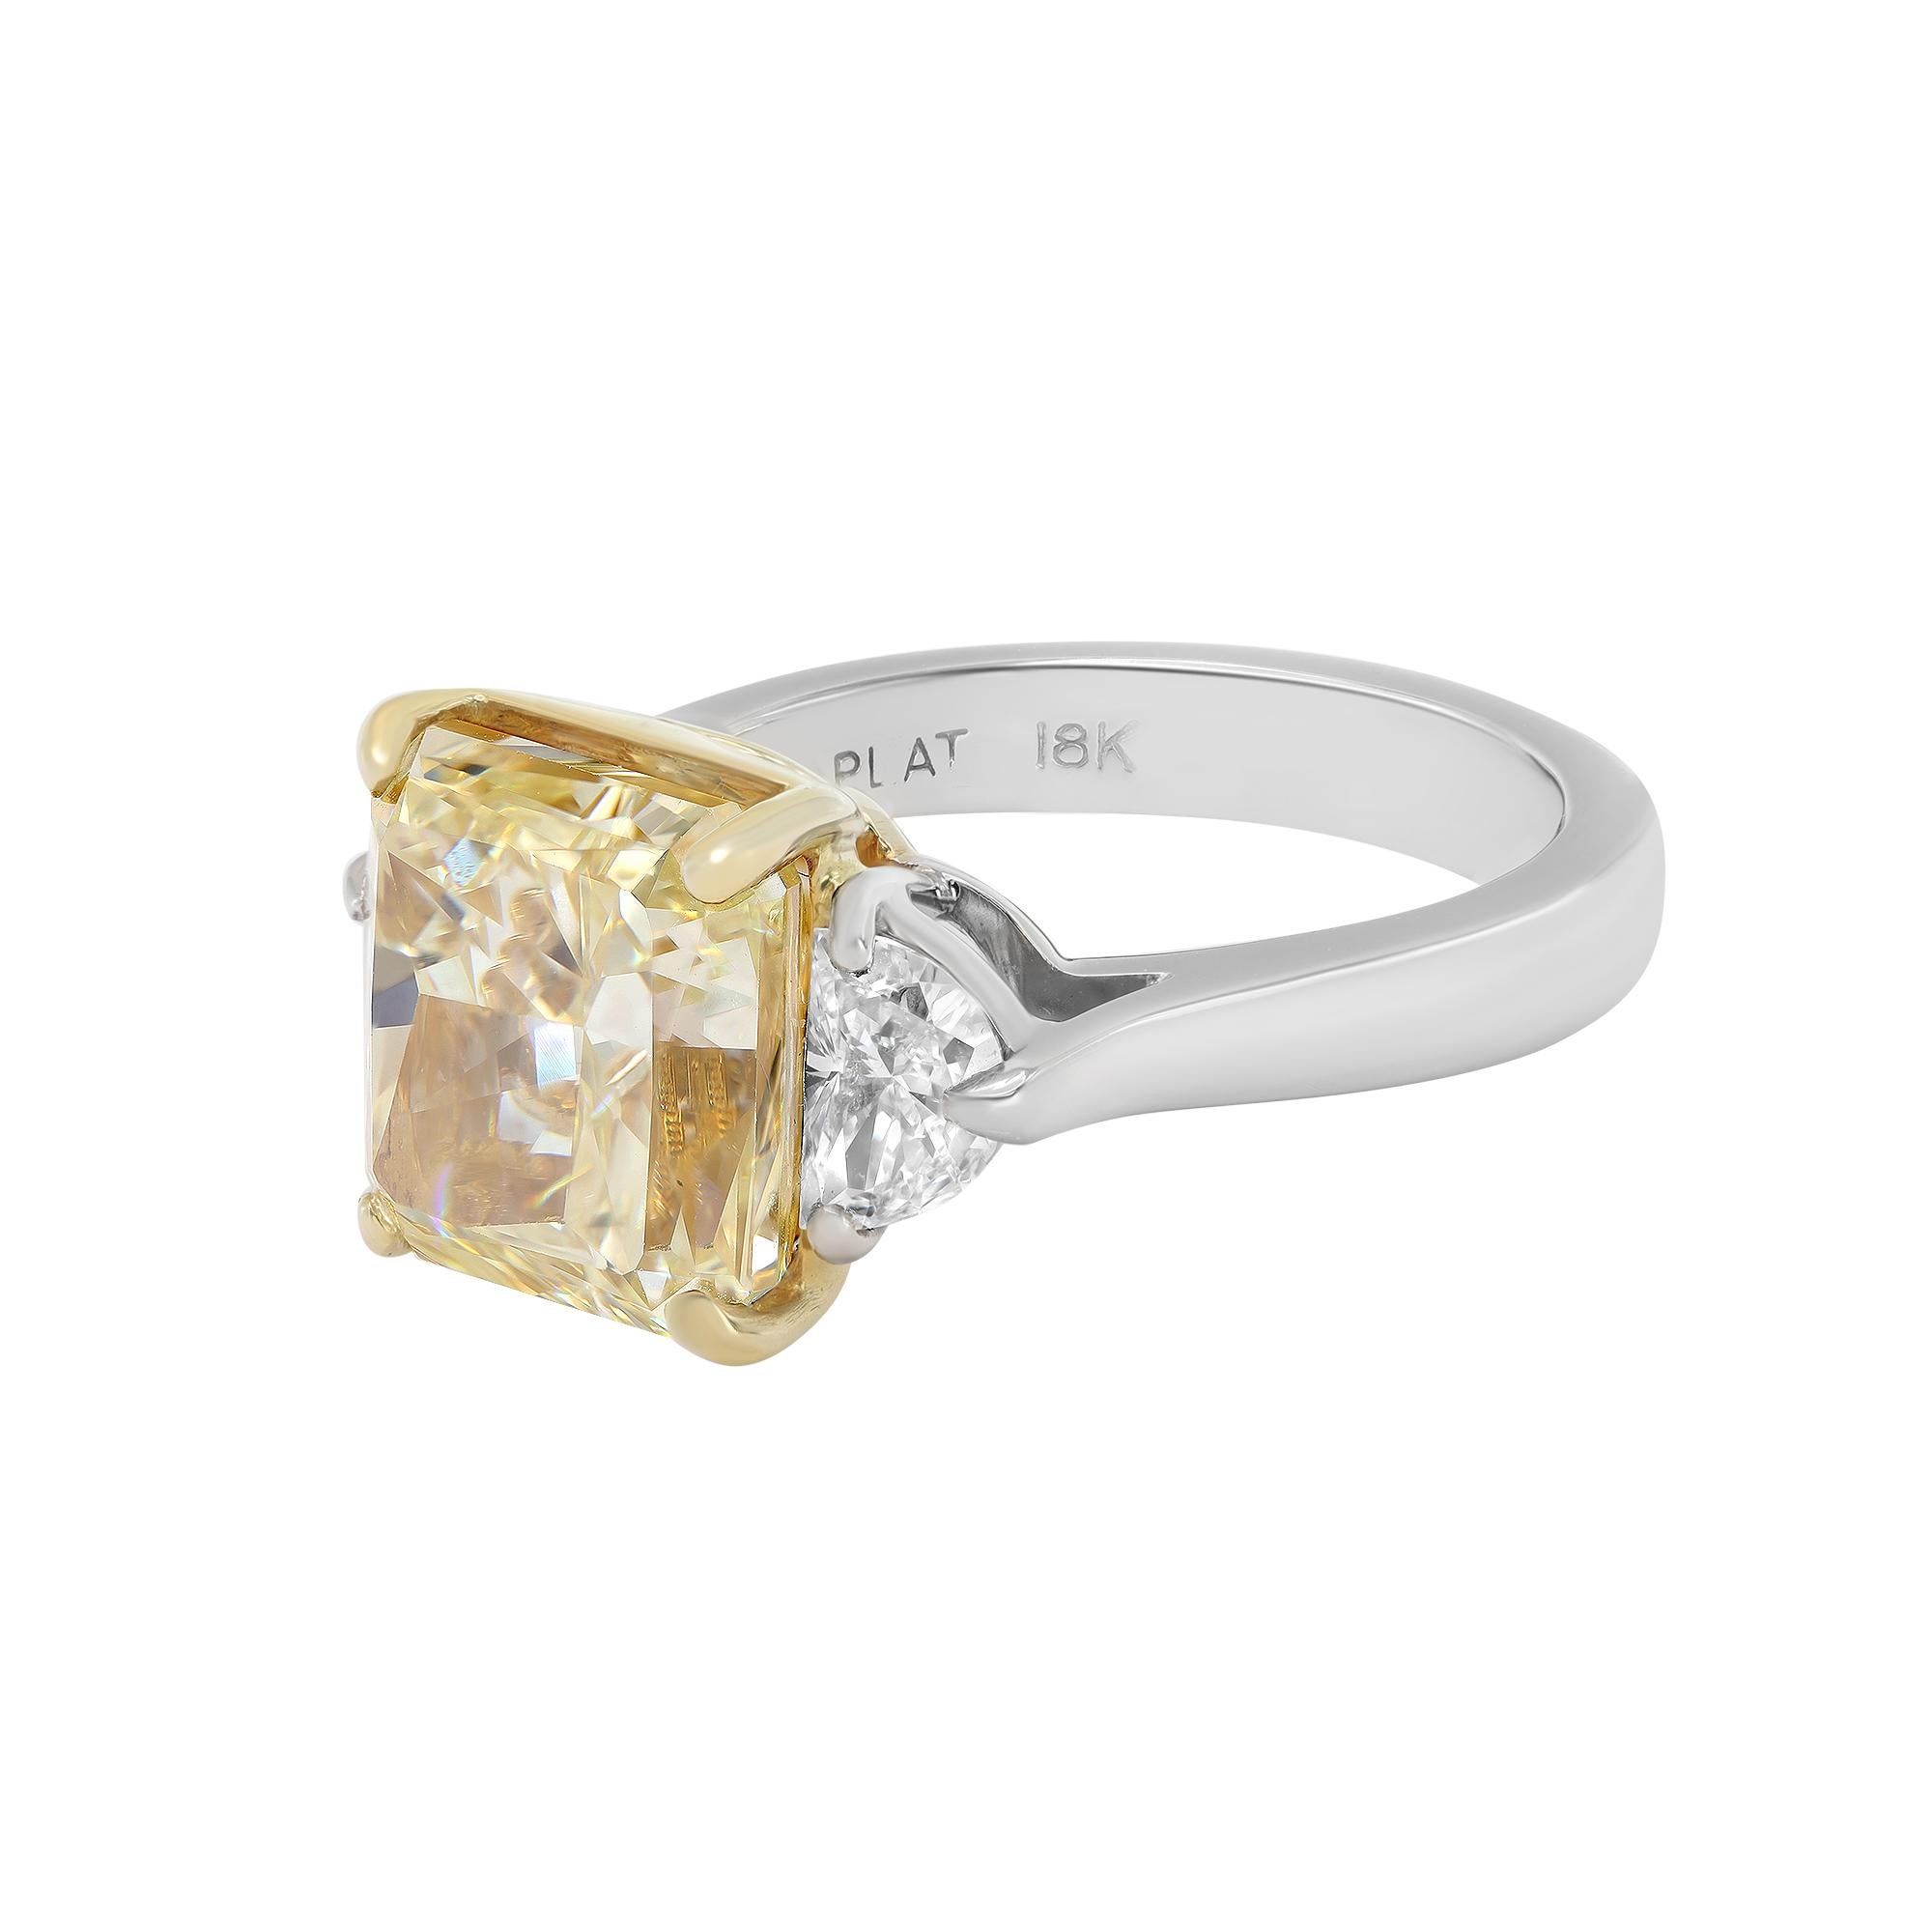 With a strong and stunning array of femininity and vibrant hues, this rare handmade three stone, fancy light yellow diamond ring is a remarkable addition to your jewelry collection. Crafted in platinum and the center stone shank in 18K yellow gold.